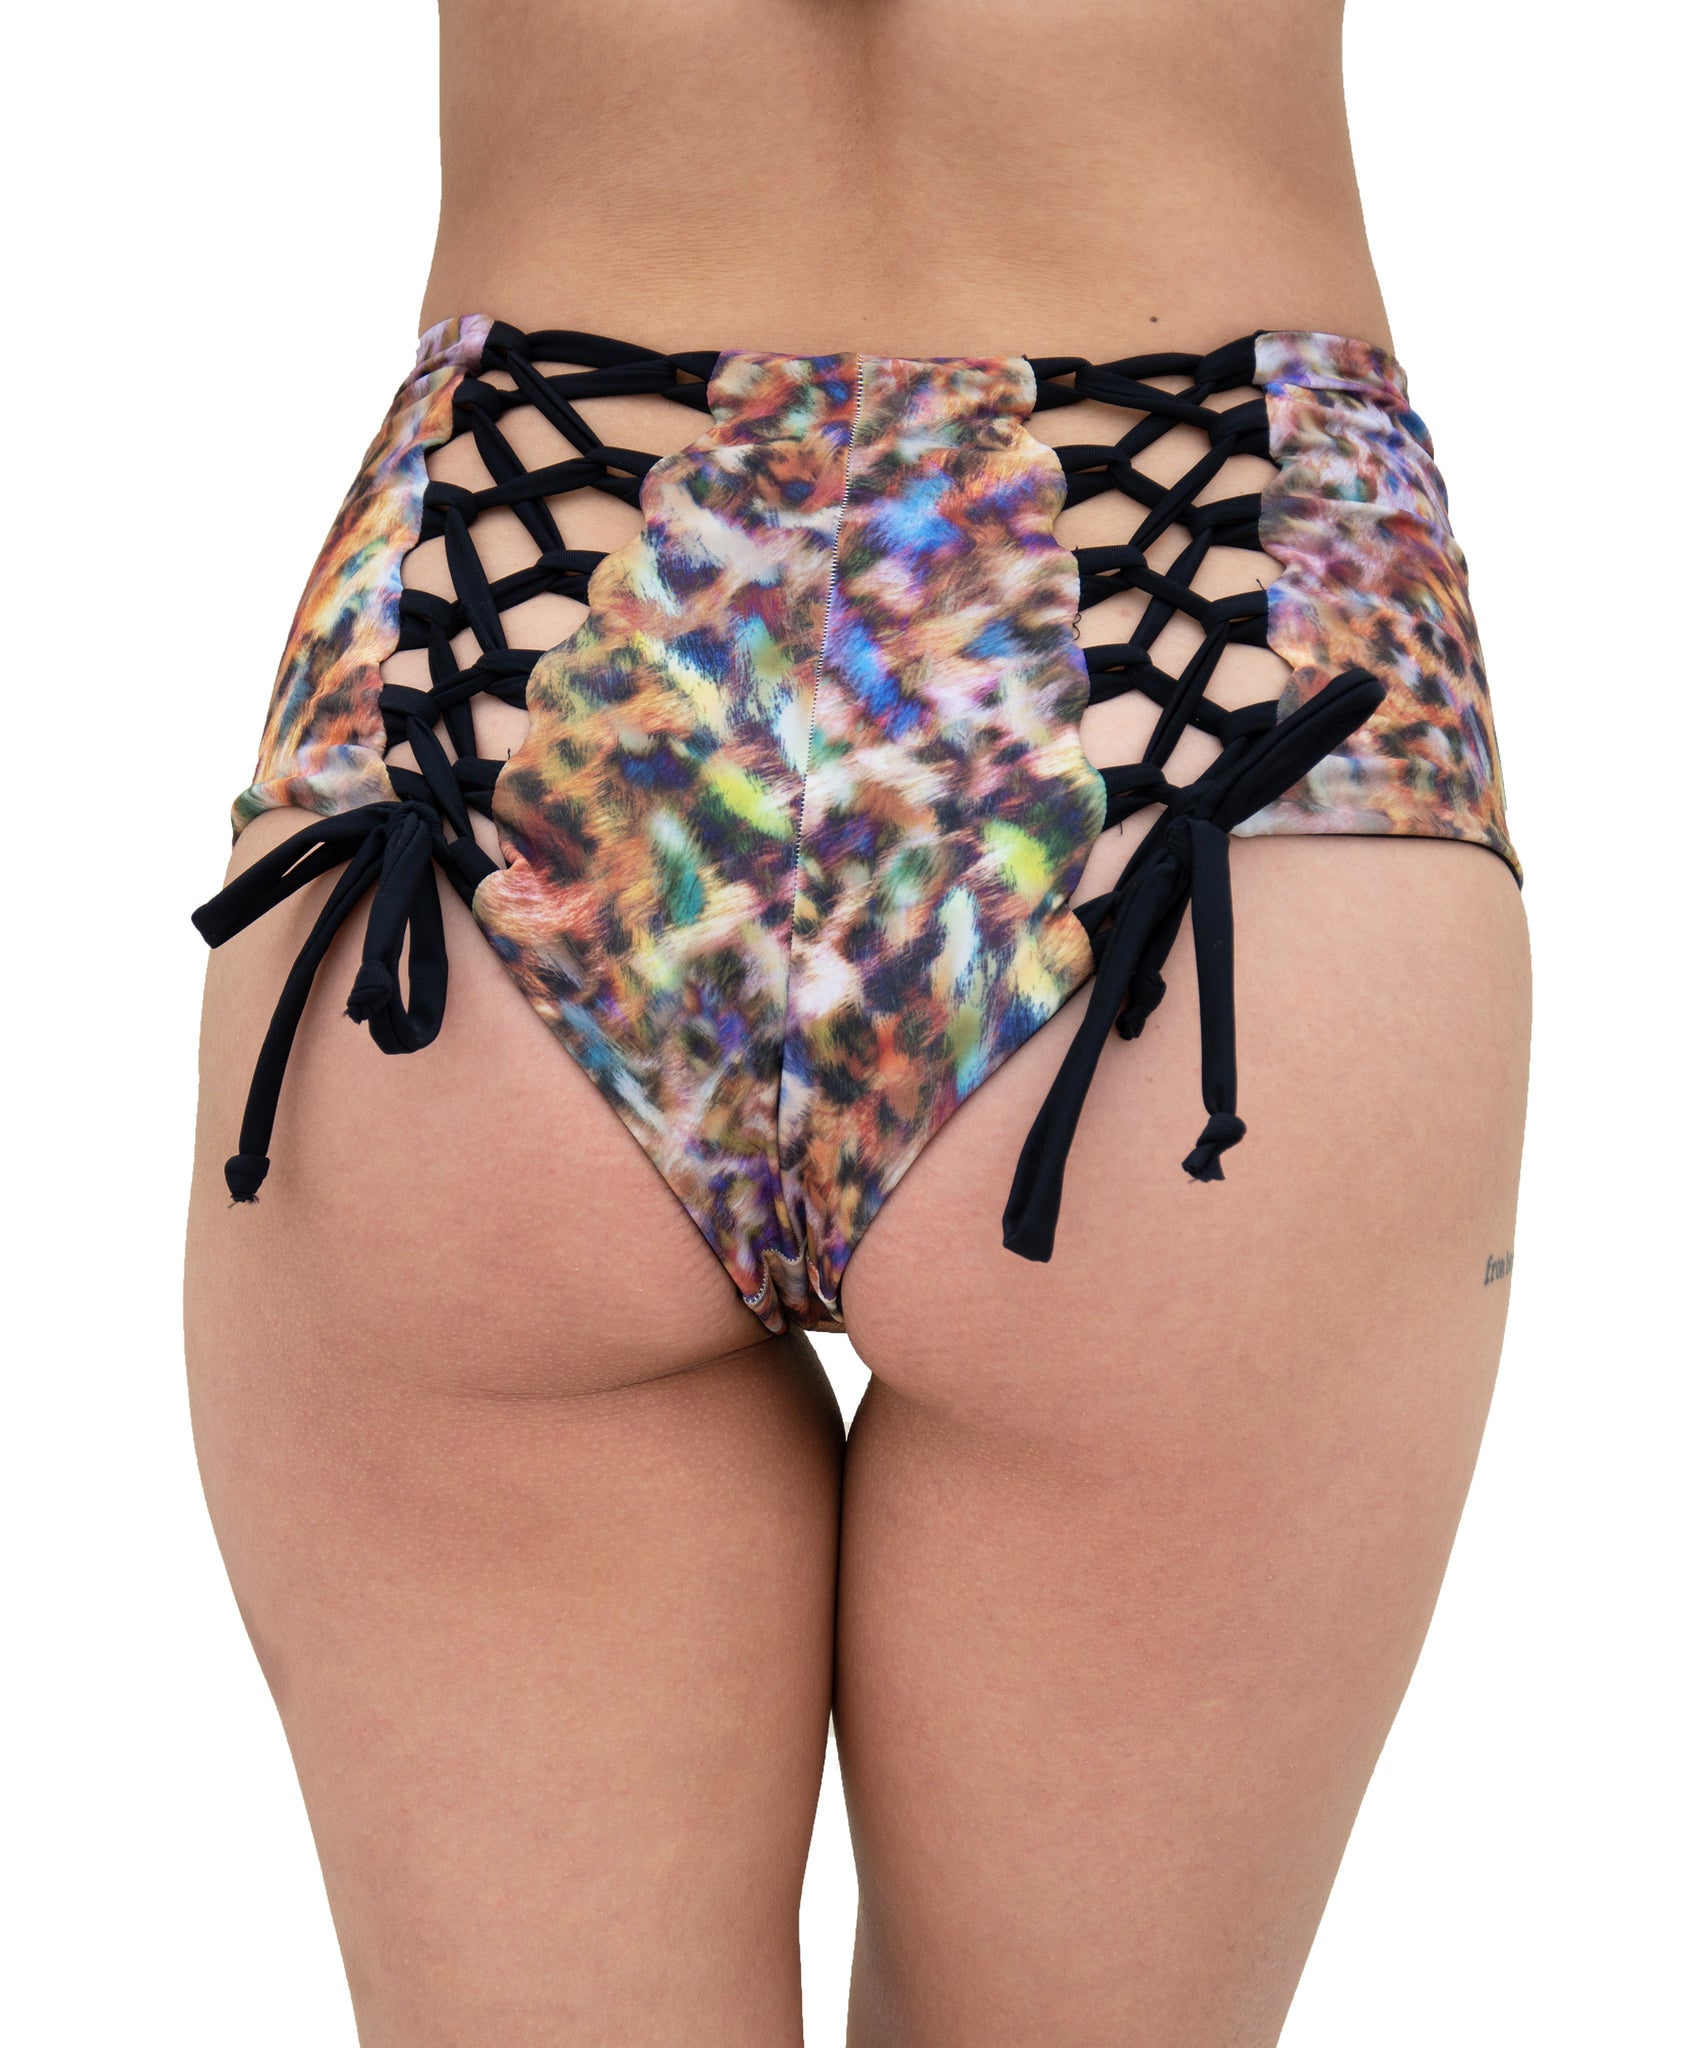 Hollywood High Waisted Short - Reversible Black & Colorful Kitty